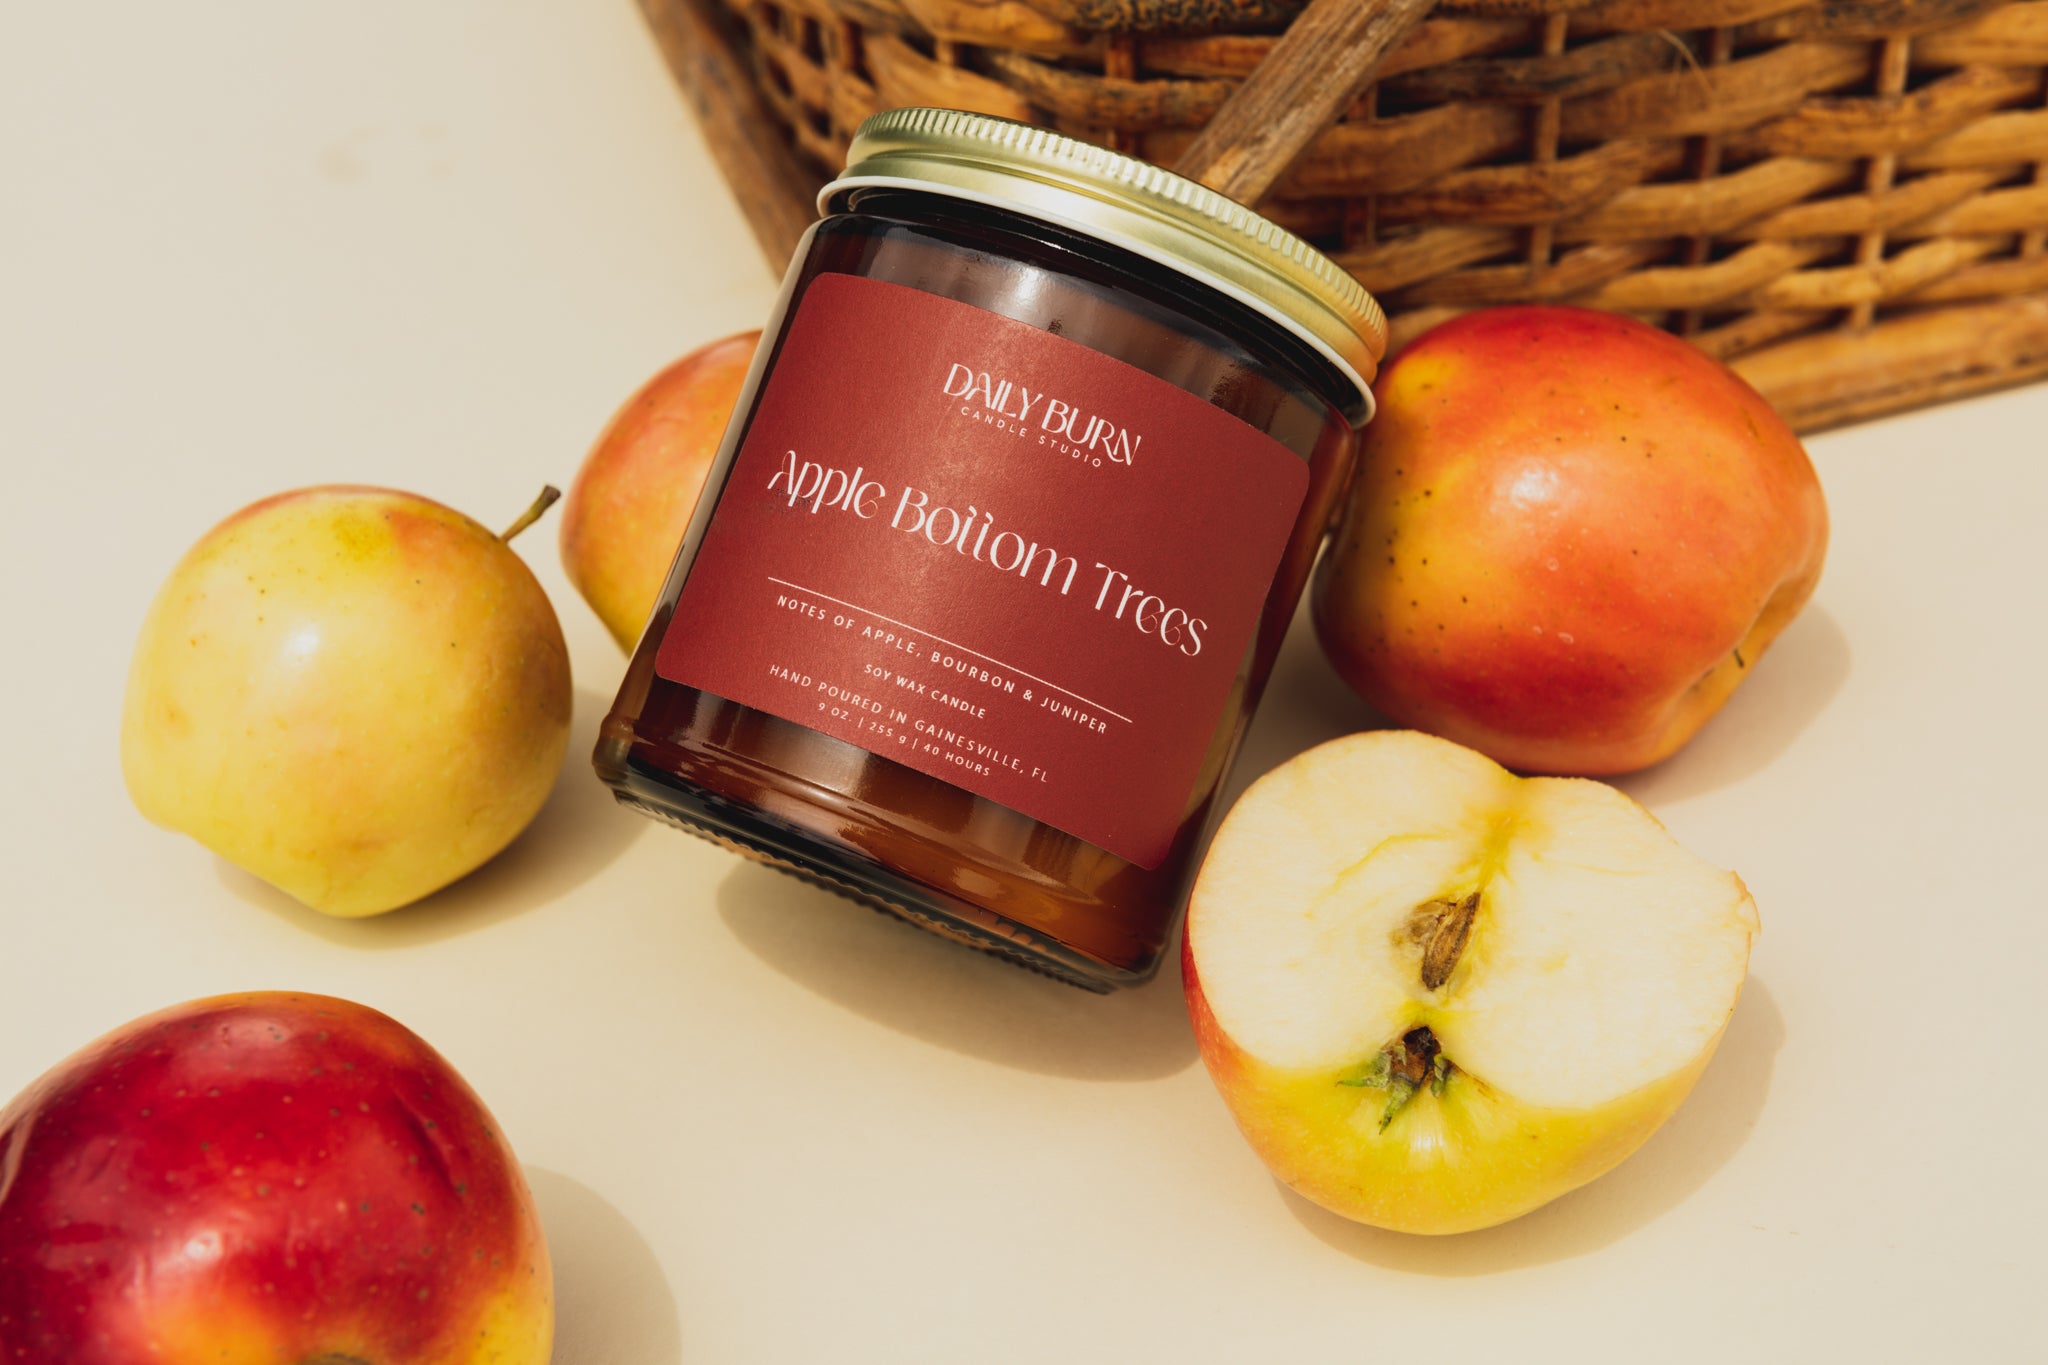 Apple Bottom Trees Candle